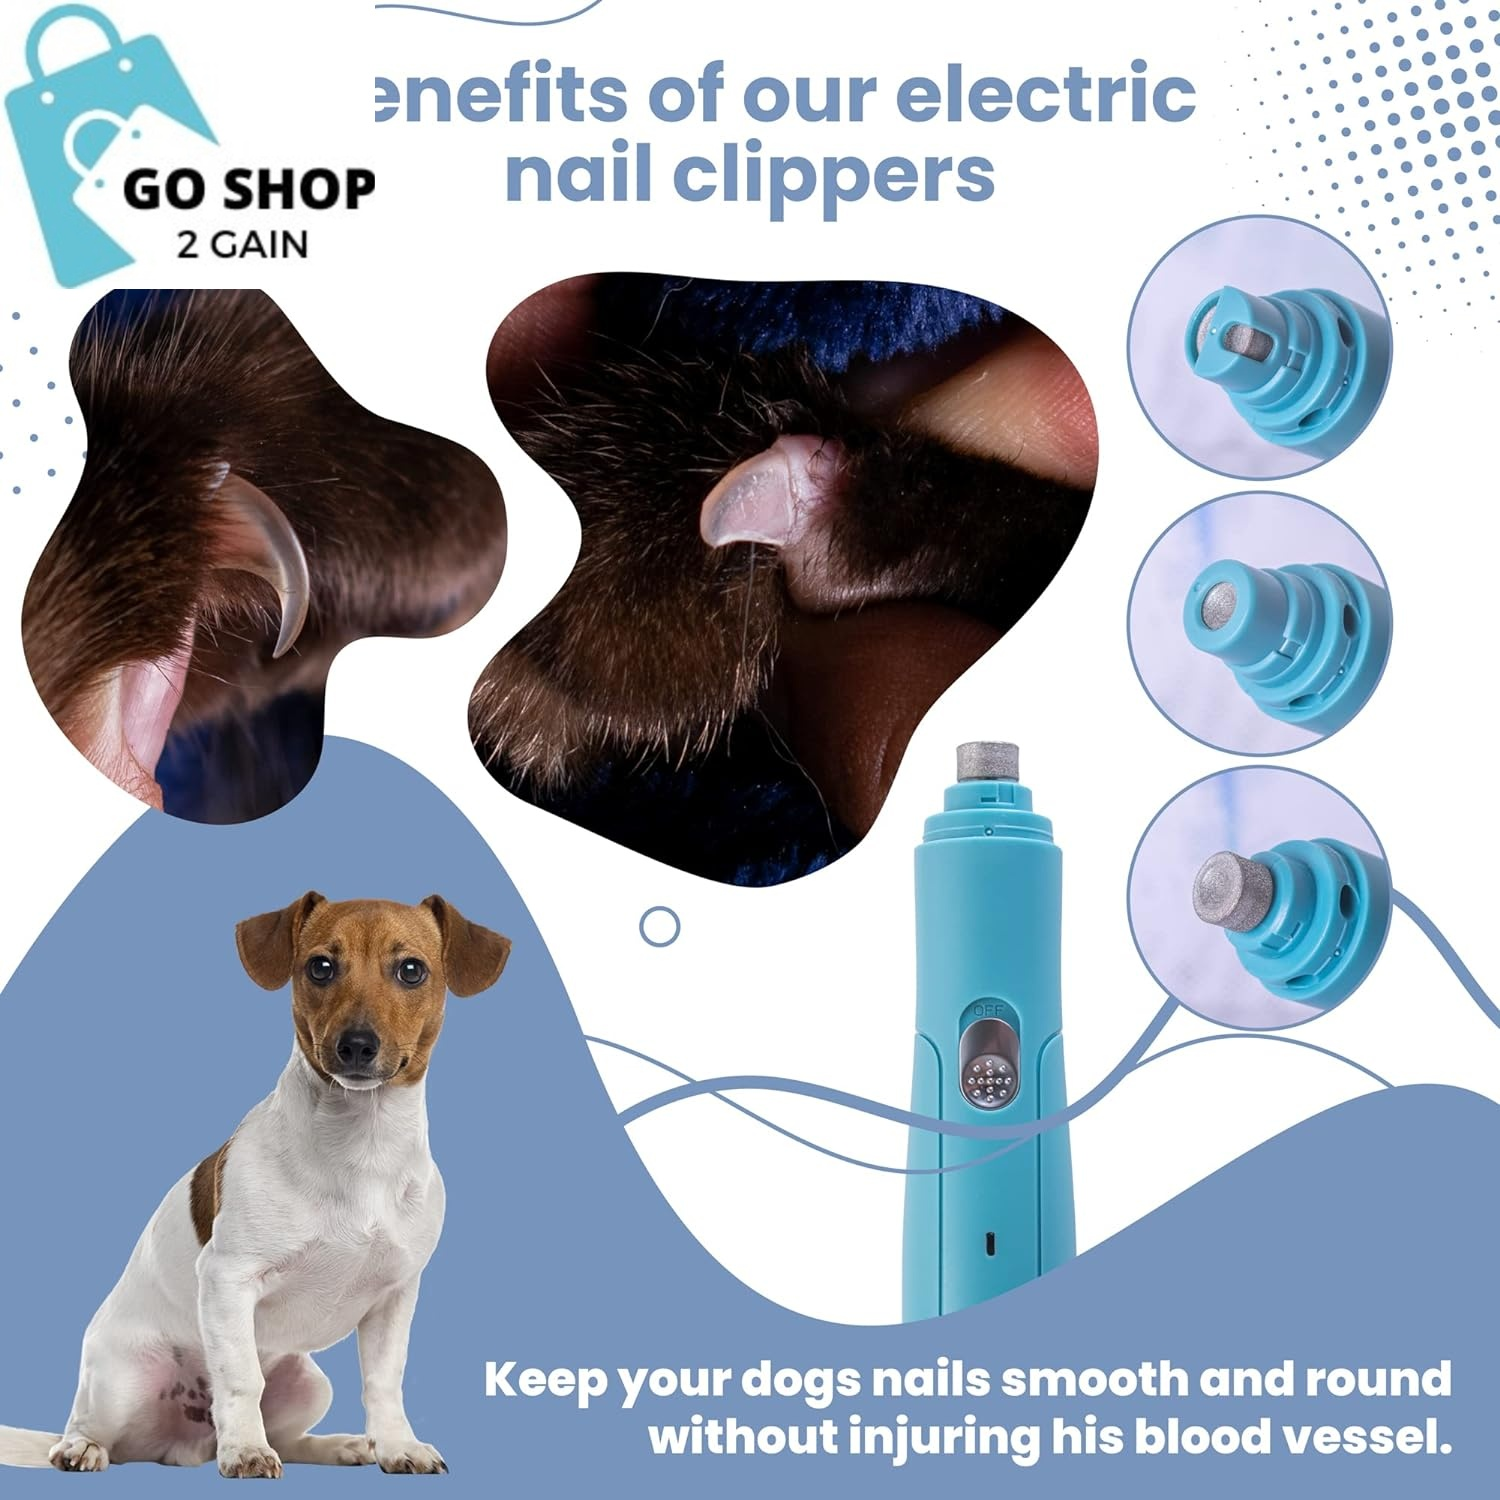 Professional Pet Dog Nail Grinder with High Speed 3 Ports 2 Sleeve Fits Different Pets. - the Dog Nail Clipper Best and Cat Small and Large. - Pet Grooming Kit Portable - Dog Supplies - Cat Products